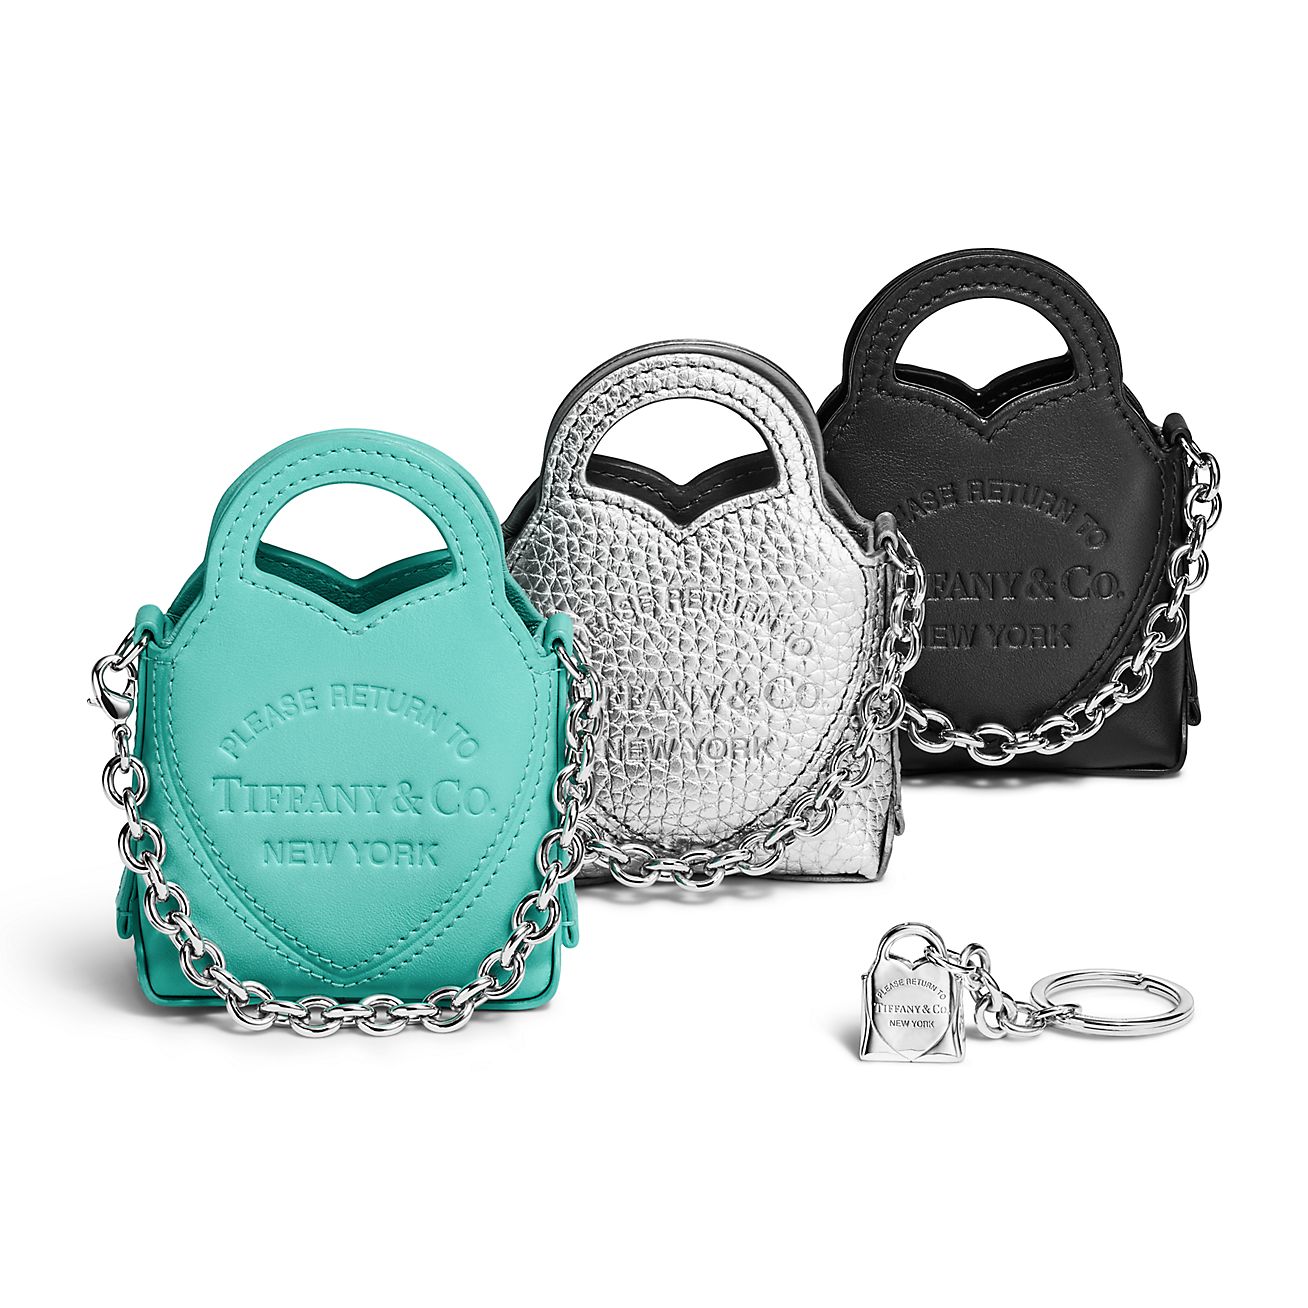 Return to Tiffany™ Nano Bag Set in Multicoloured Leather with a Keyring |  Tiffany & Co.